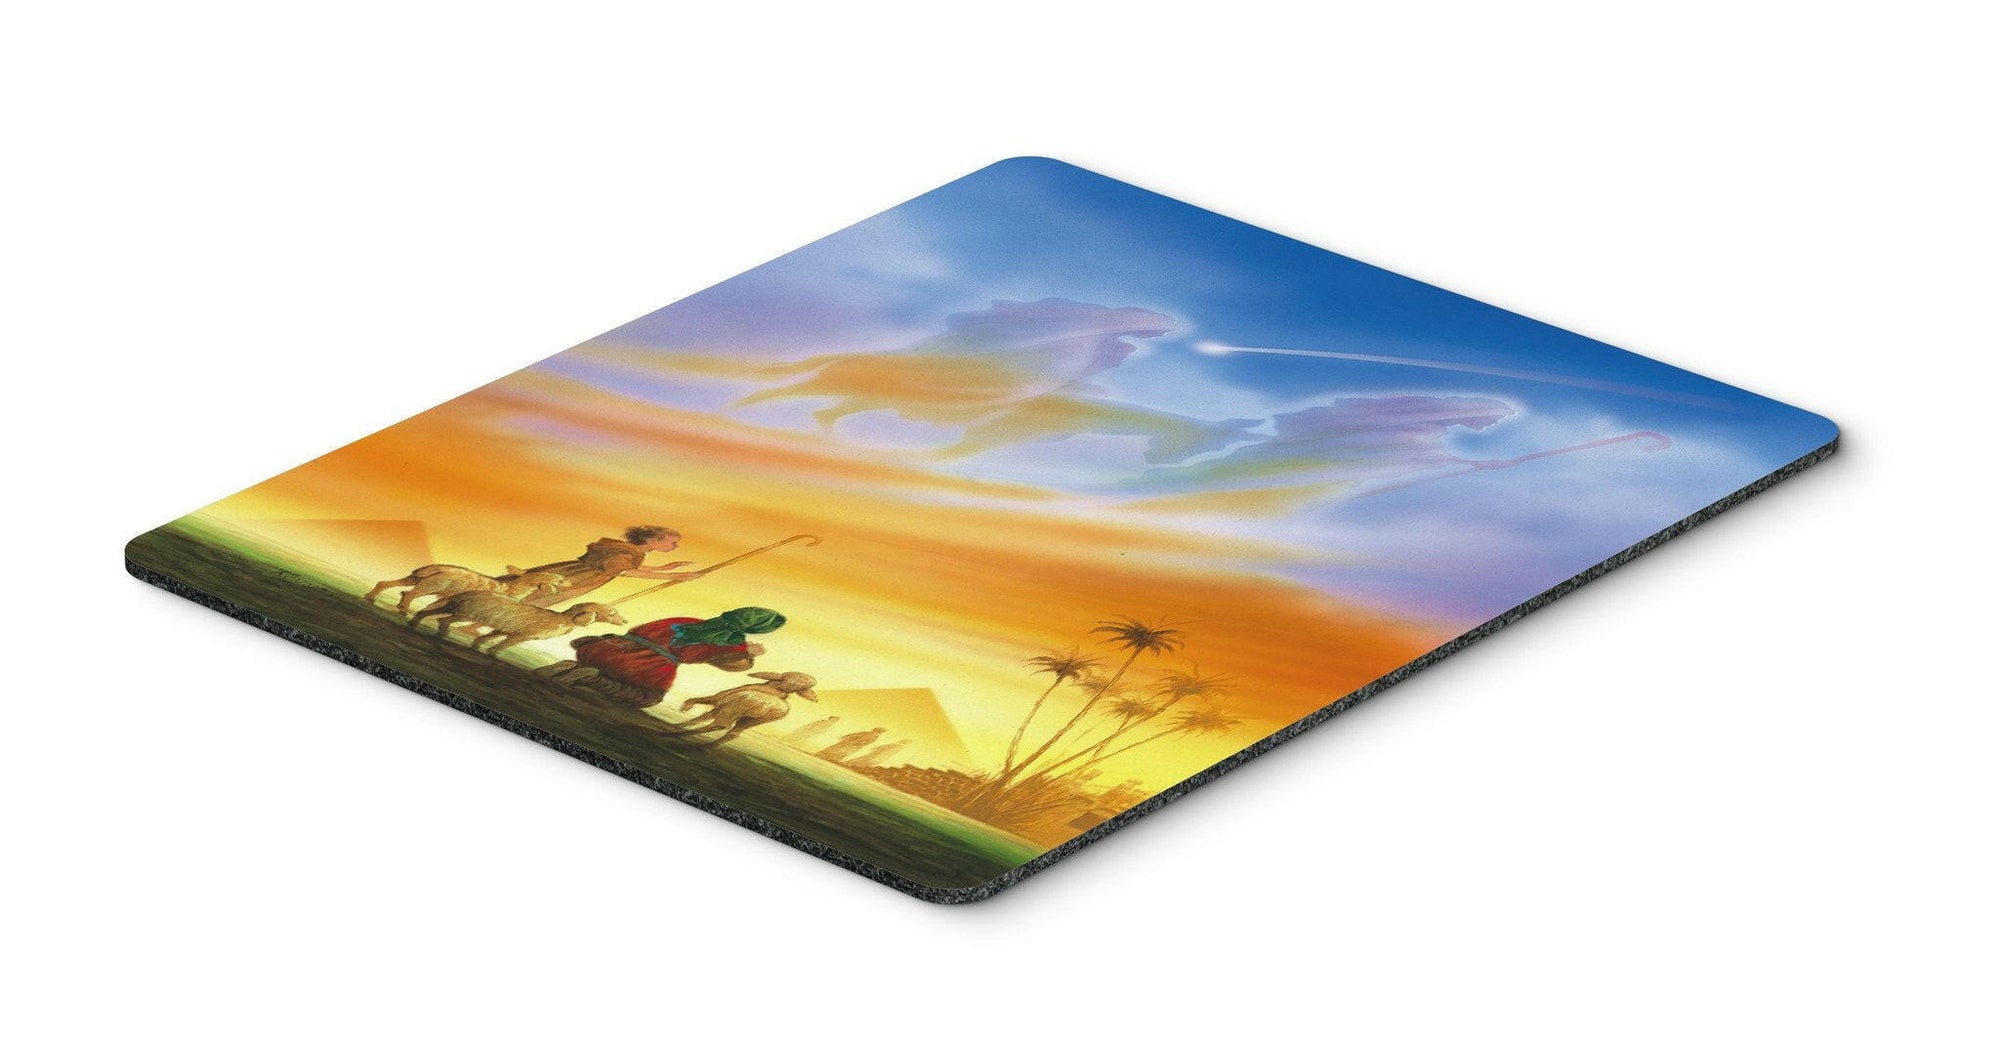 Shepherds being guided Christmas Mouse Pad, Hot Pad or Trivet APH0939MP by Caroline's Treasures